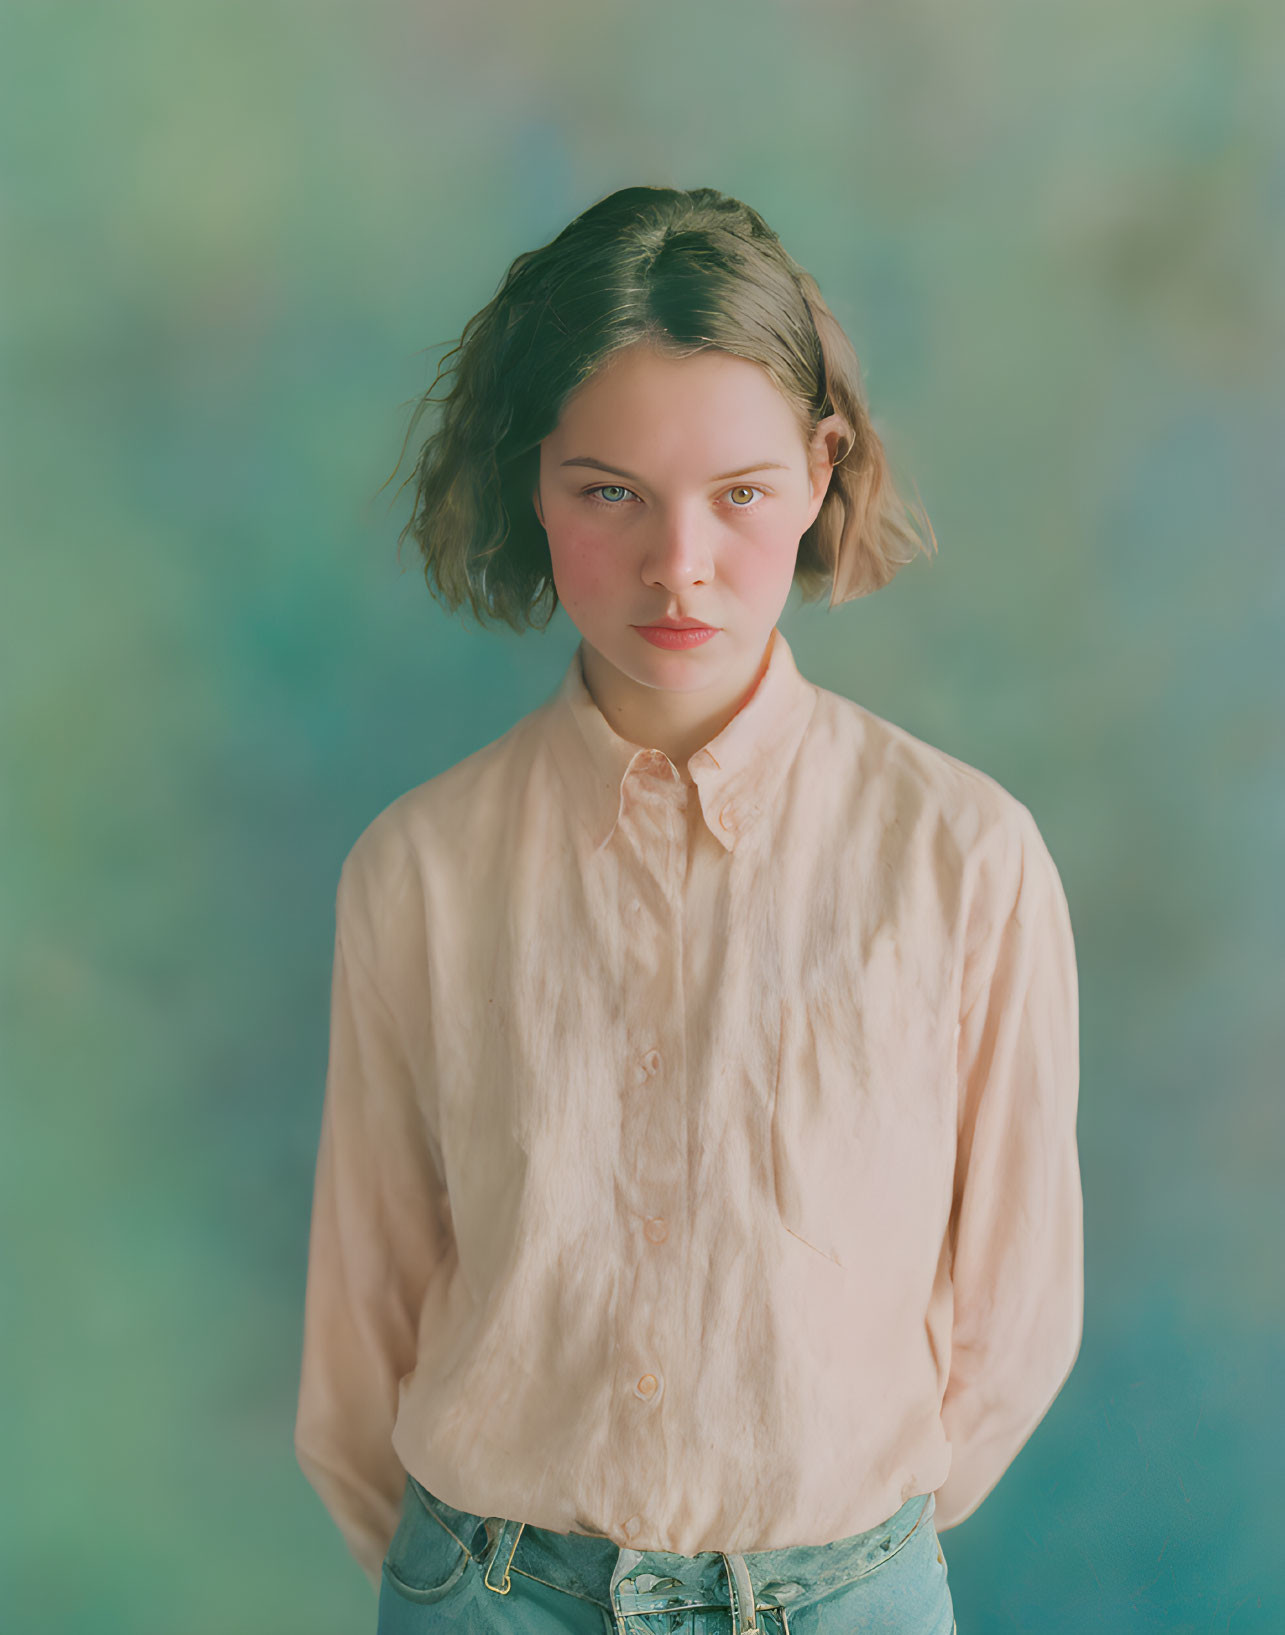 Young female with short wavy hair in pale pink shirt and blue jeans against textured backdrop.